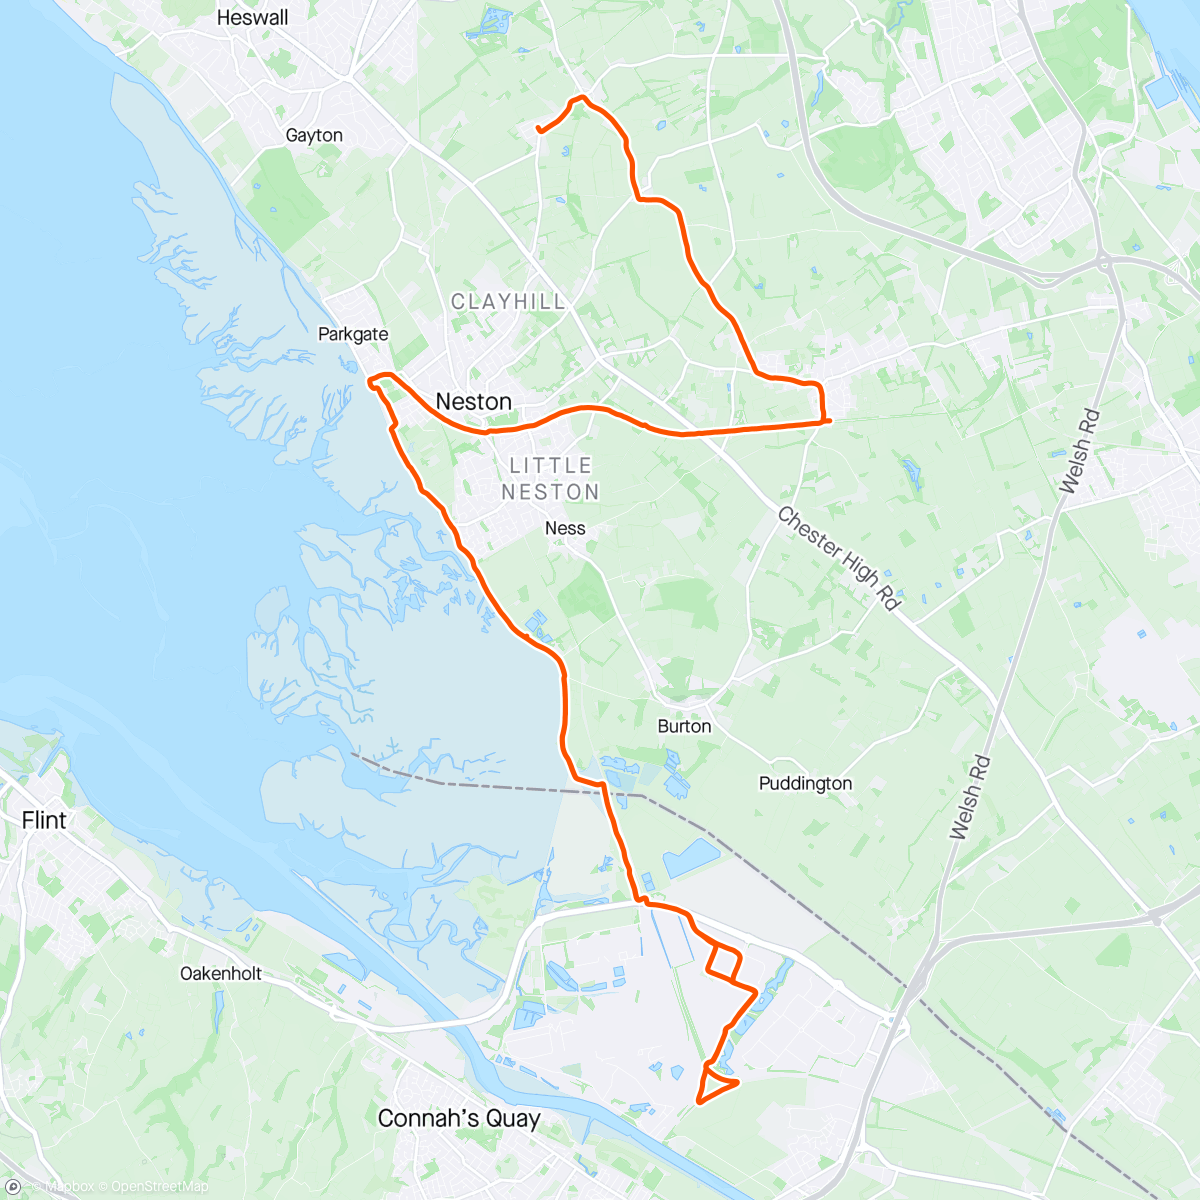 Mapa de la actividad (30k planned and done - a run of 3 parts - to Hadlow to meet Jules and Sarah, then to Net’s to meet the Teamies then a last brutal 15k 😭)